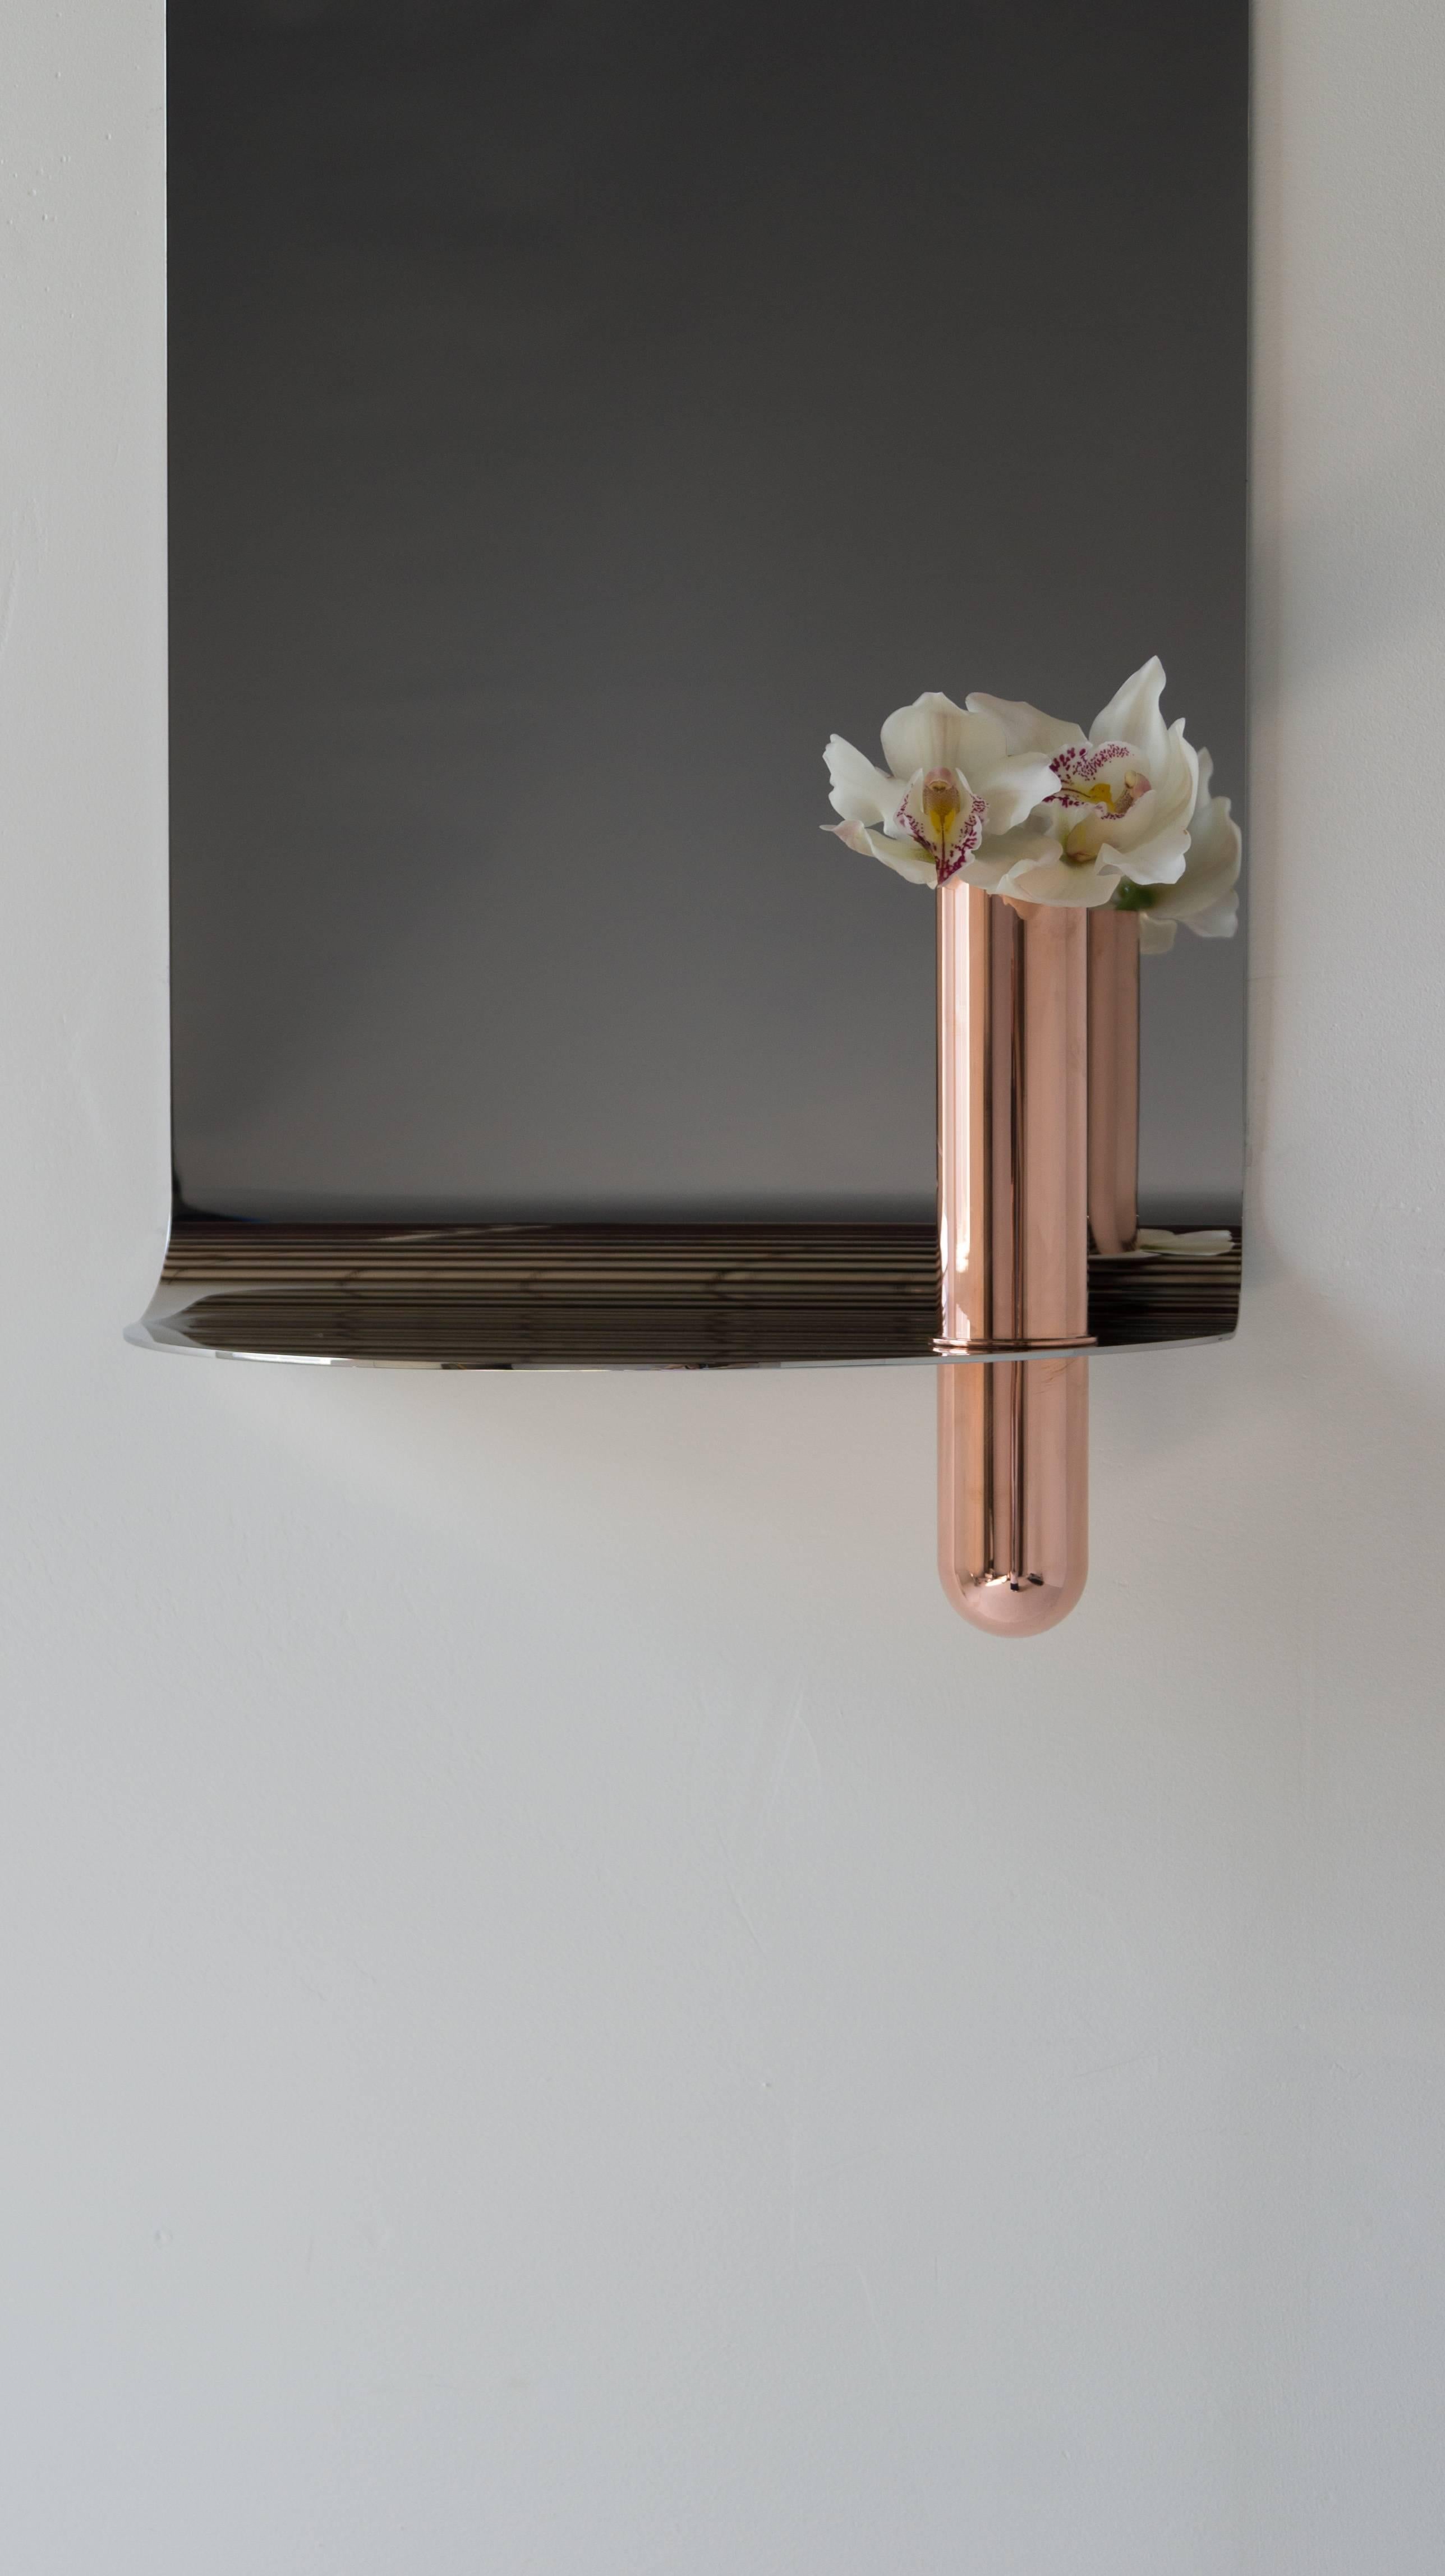 Polished Stainless Steel Mirror with Brushed Brass Vase by Birnam Wood Studio For Sale 2